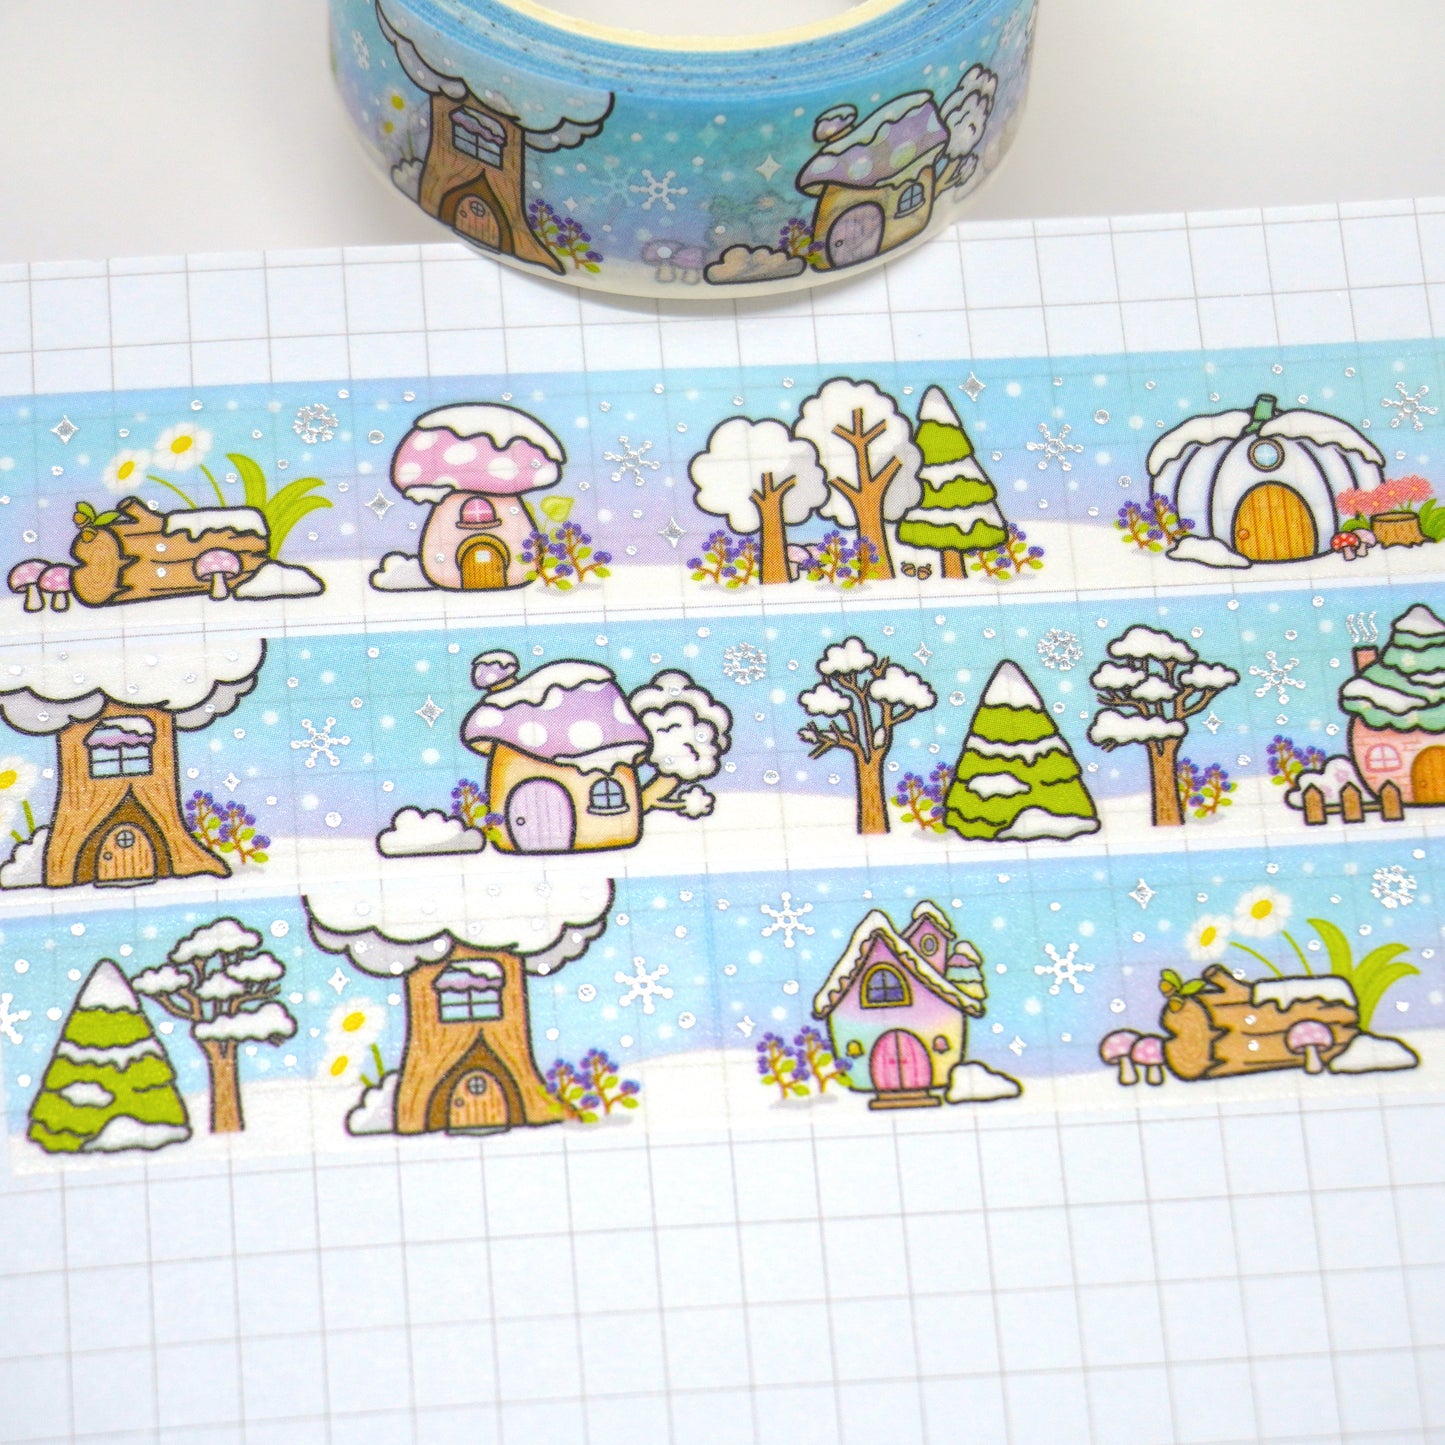 Magic Forest "Winter" | Silver foil | 15mm washi tape